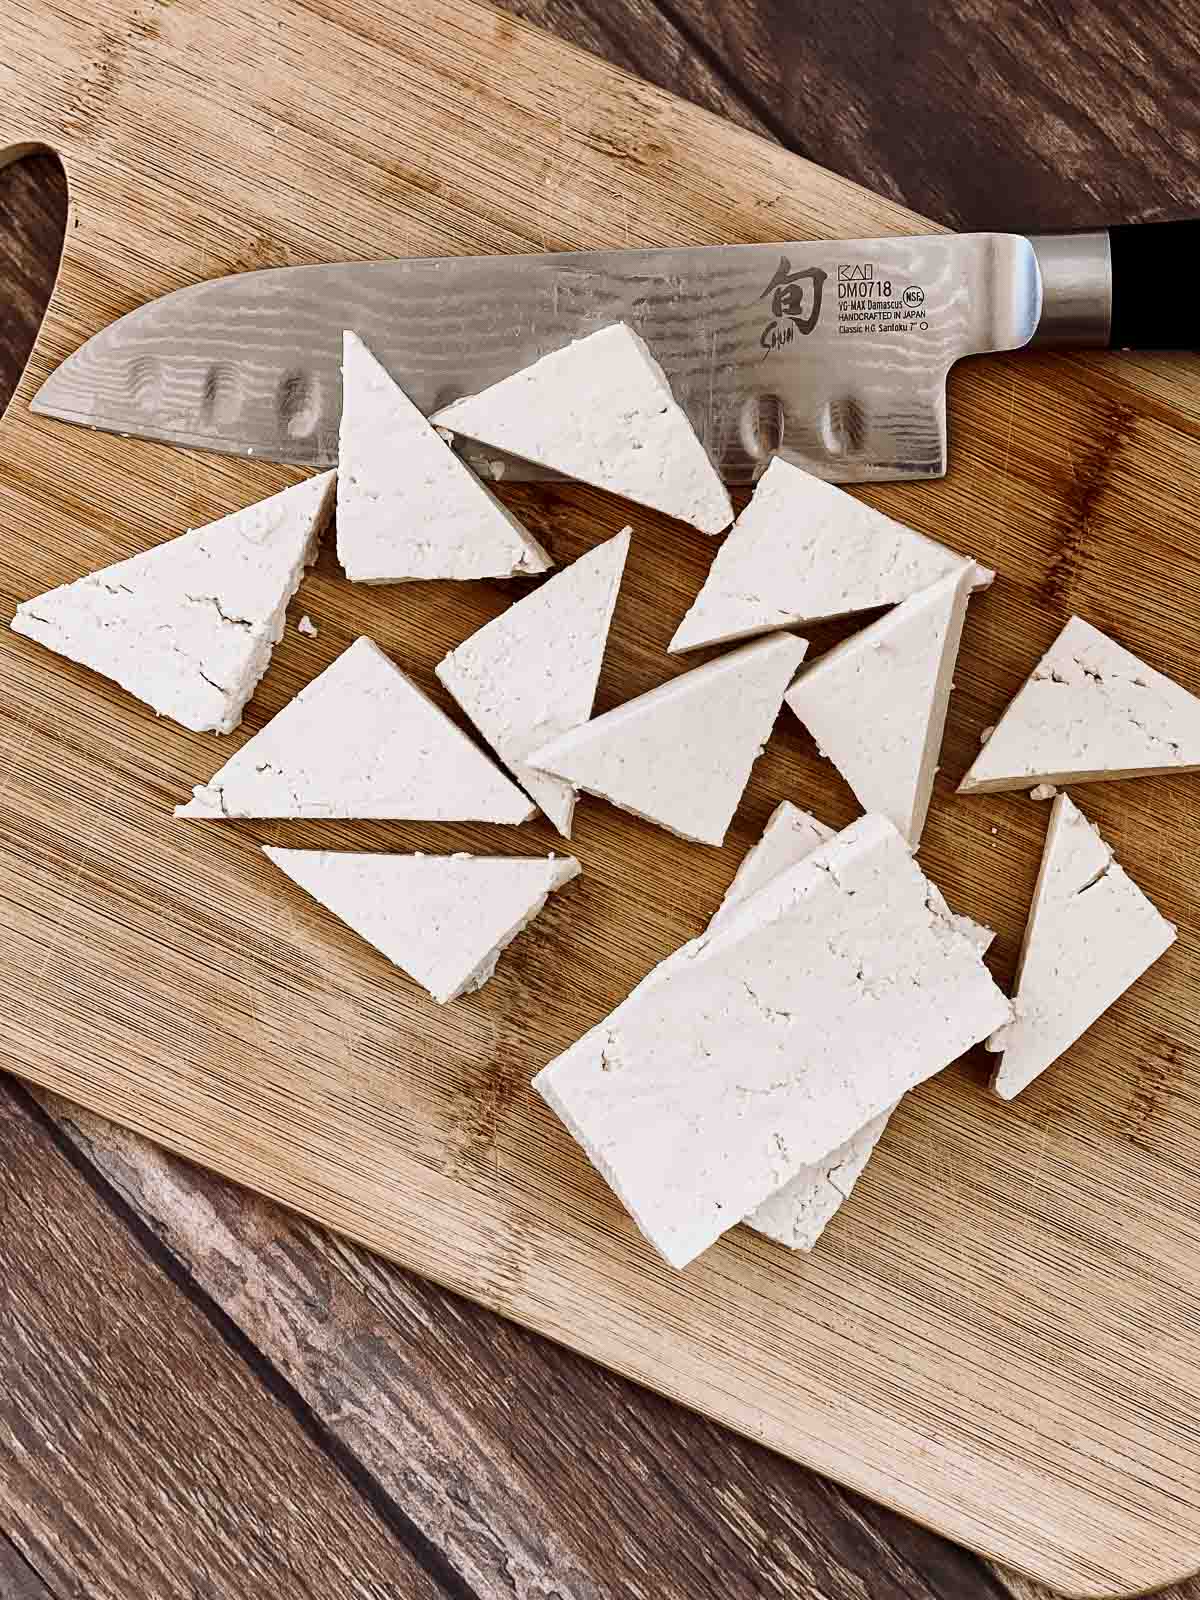 Cut tofu triangles on a wooden cutting board with a chef's knife on the side.